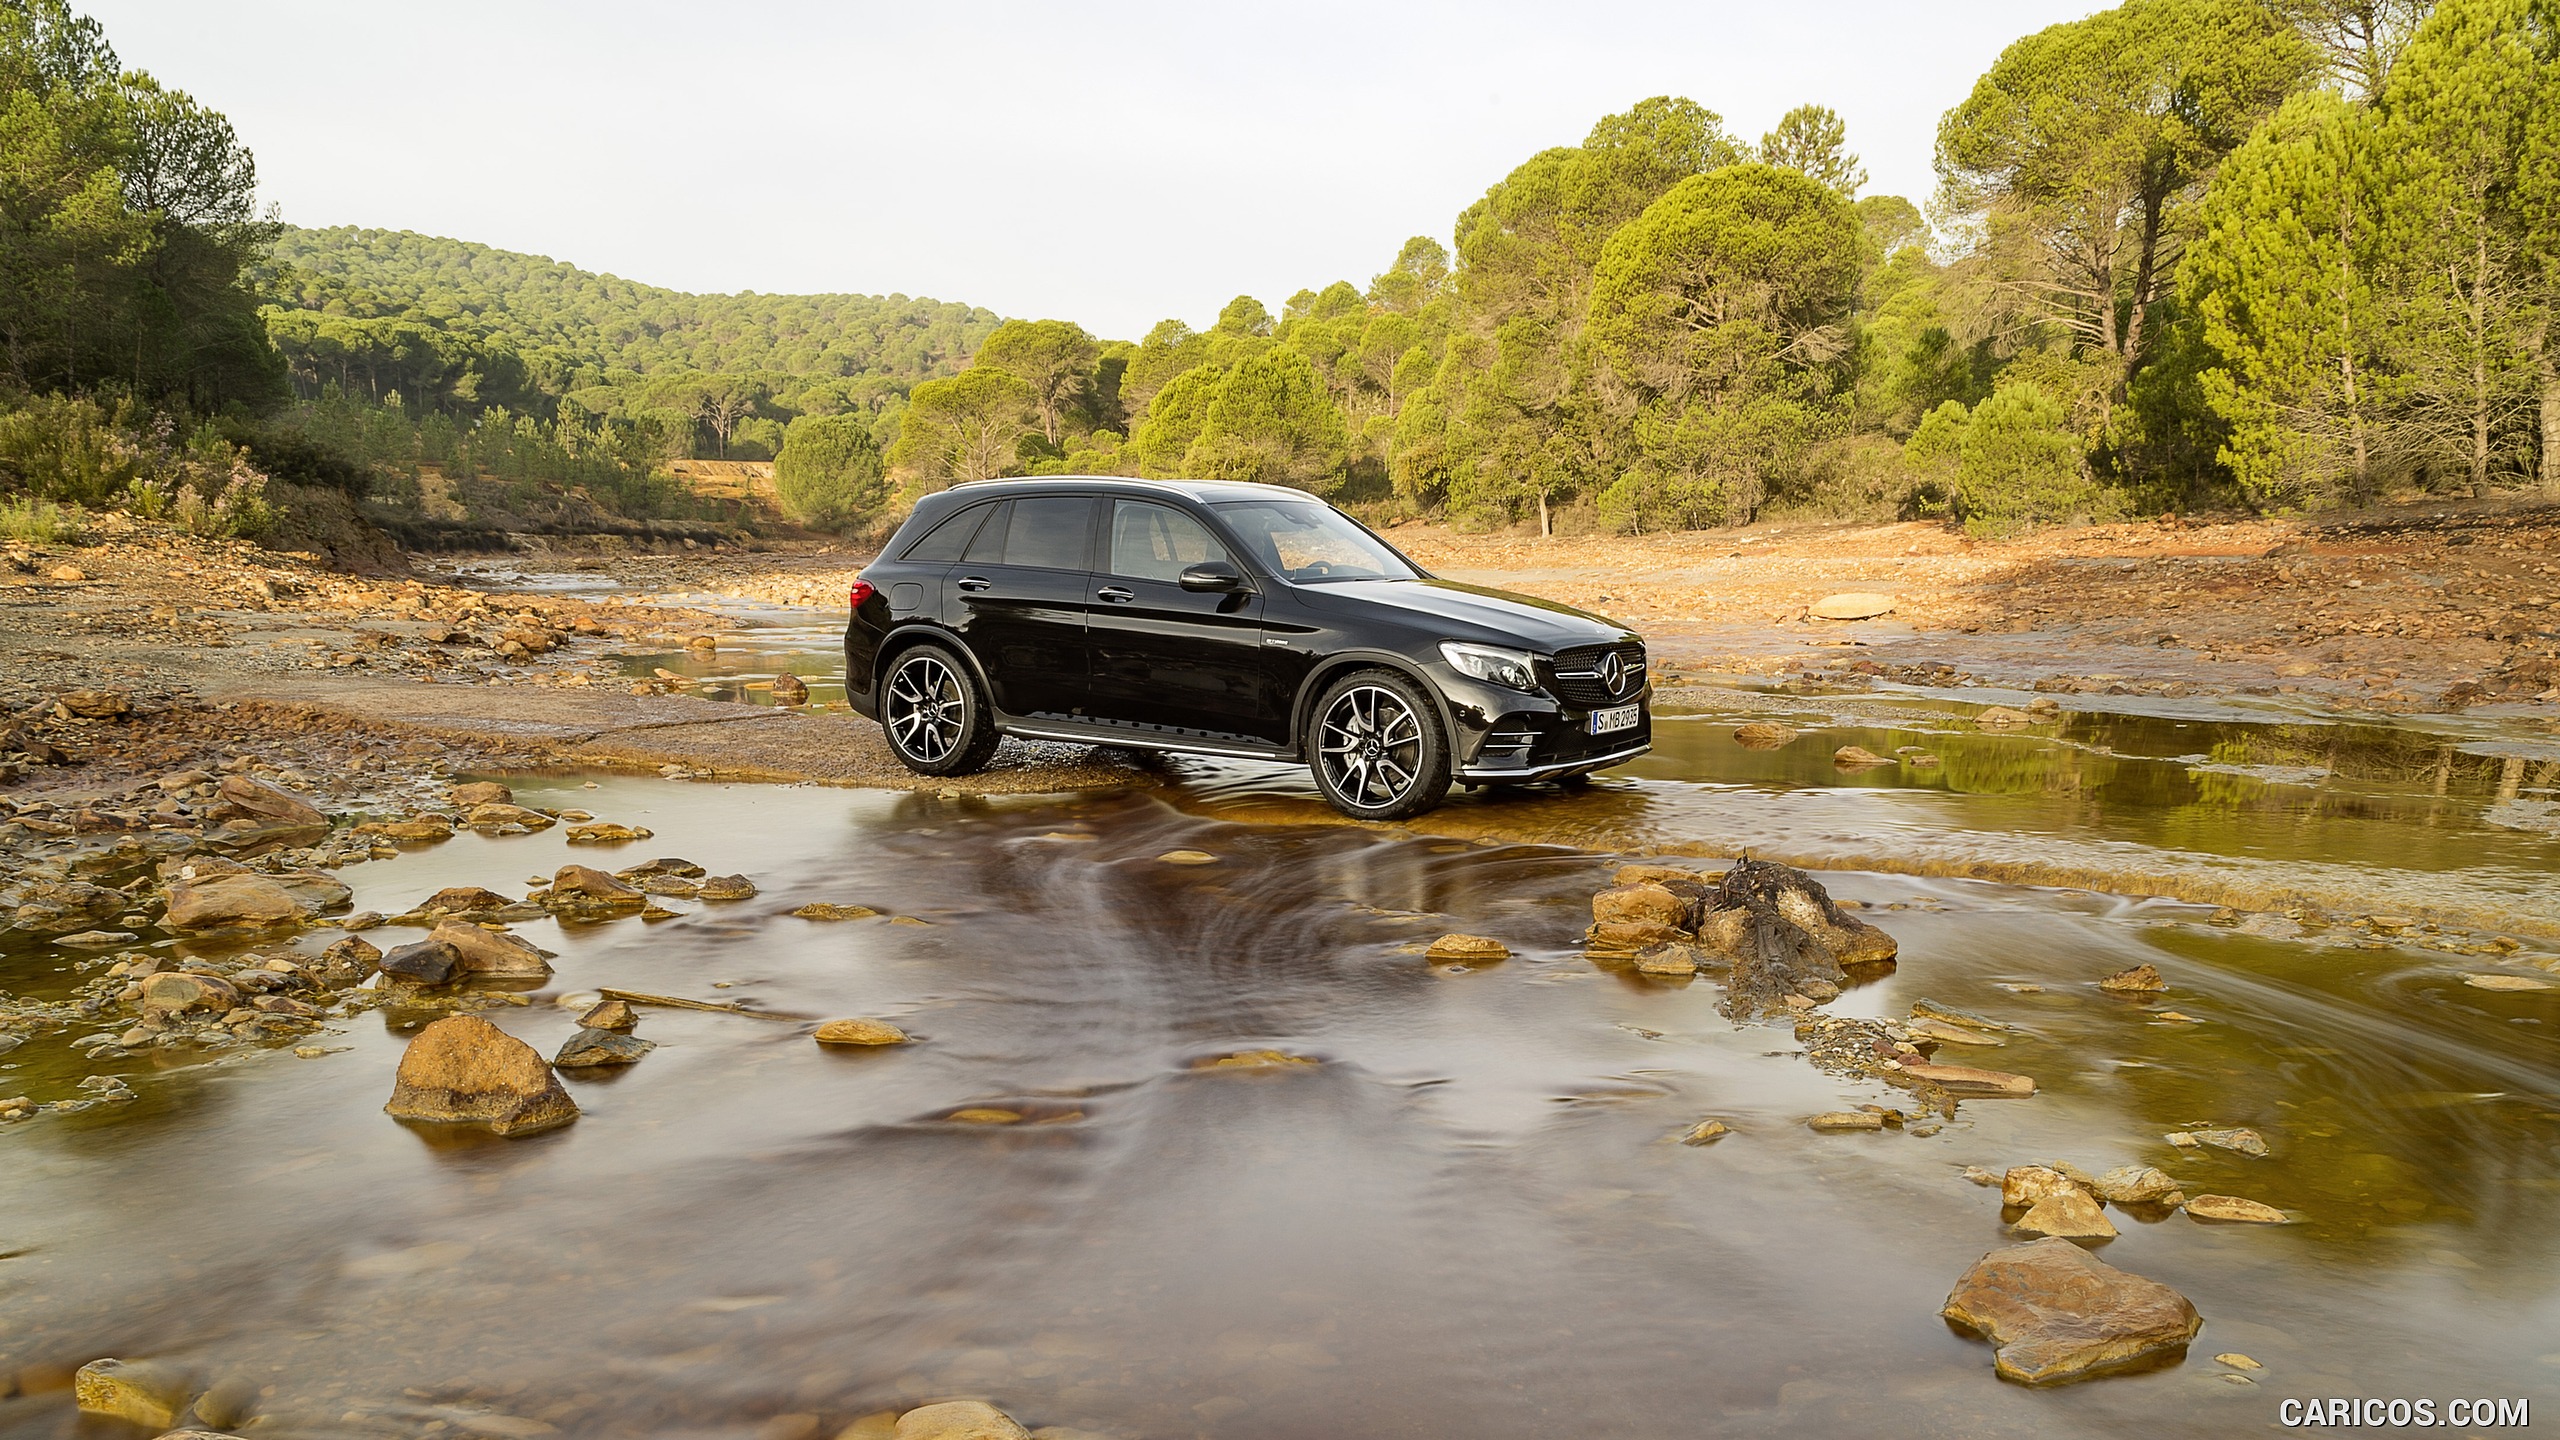 2017 Mercedes-AMG GLC 43 4MATIC (Chassis: X253, Color: Obsidian Black) - Off-Road, #21 of 108